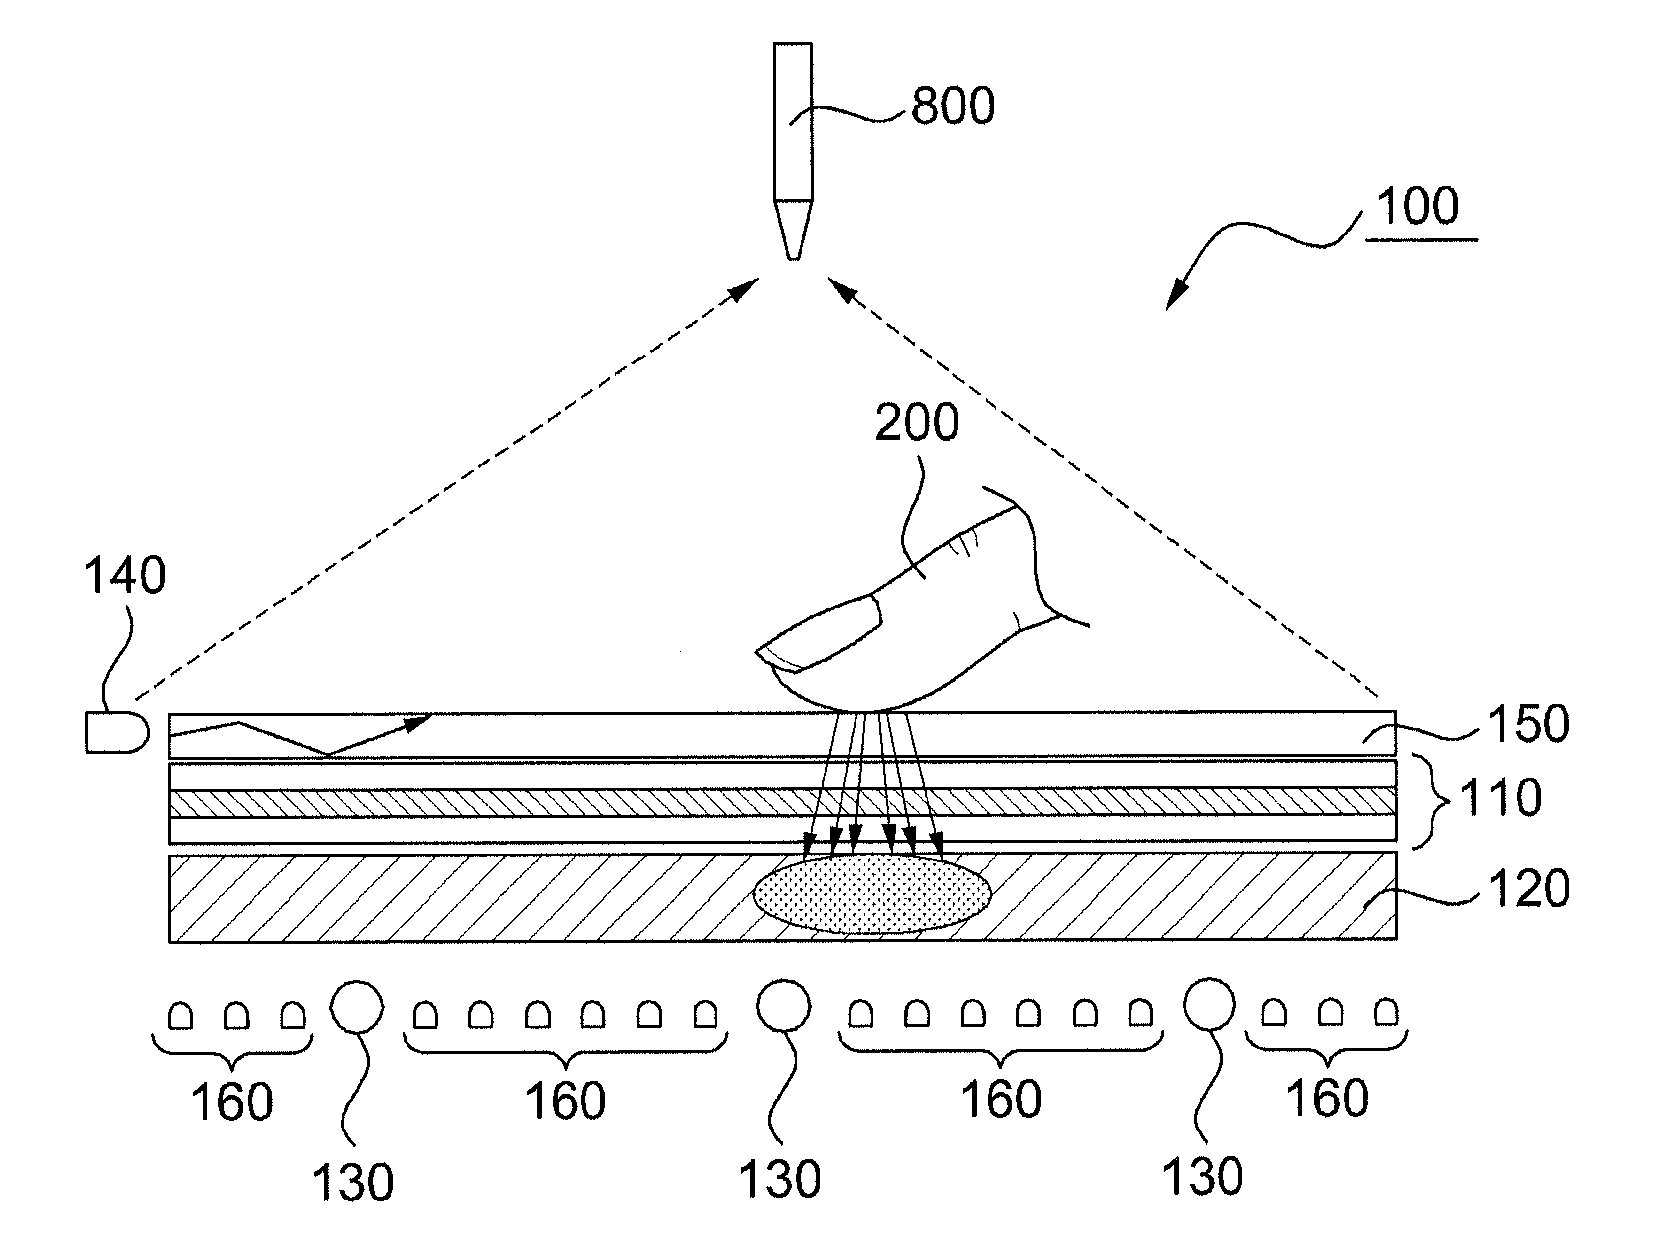 Multi-touch and proximate object sensing apparatus using sensing array